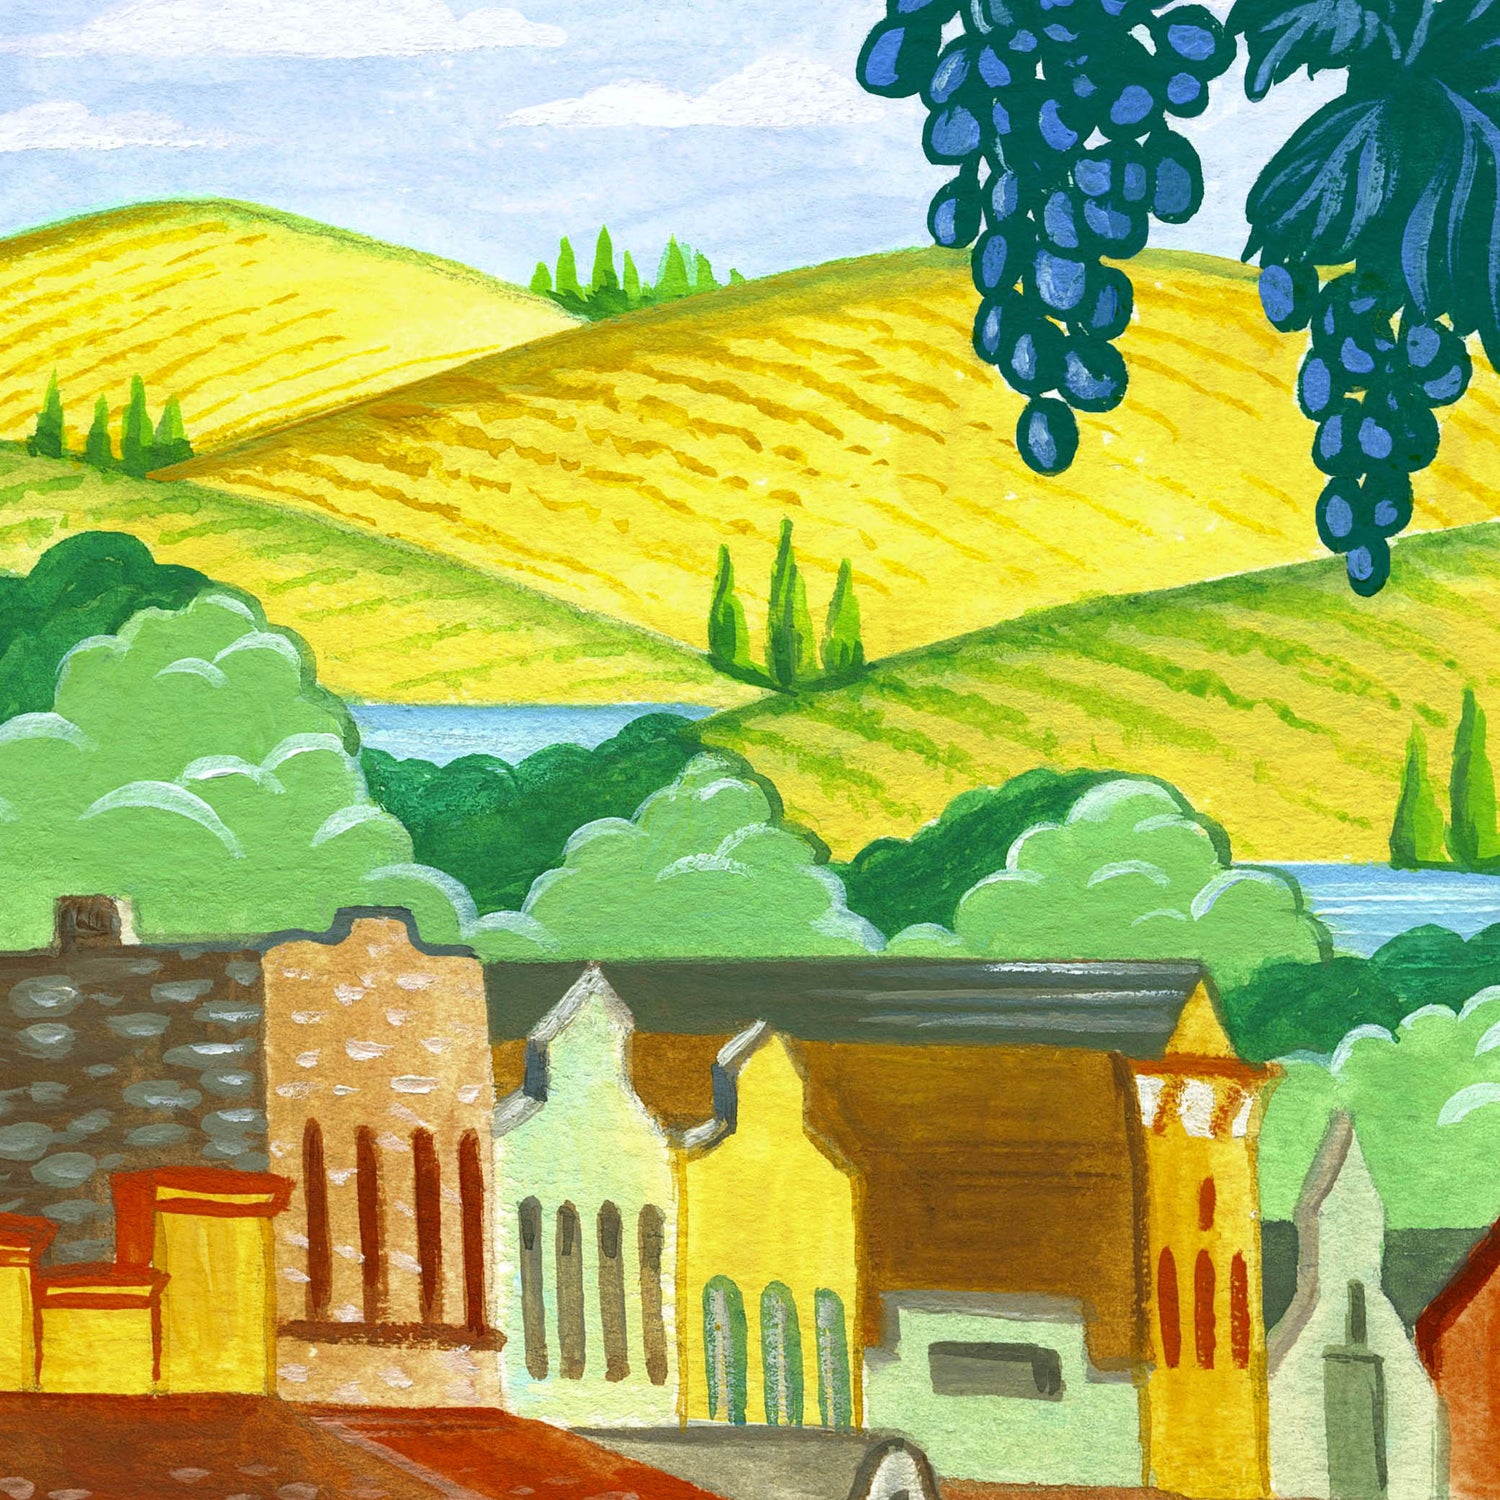 Historic Calistoga Main Street illustration detail with winery and vineyards; artwork by Angela Staehling